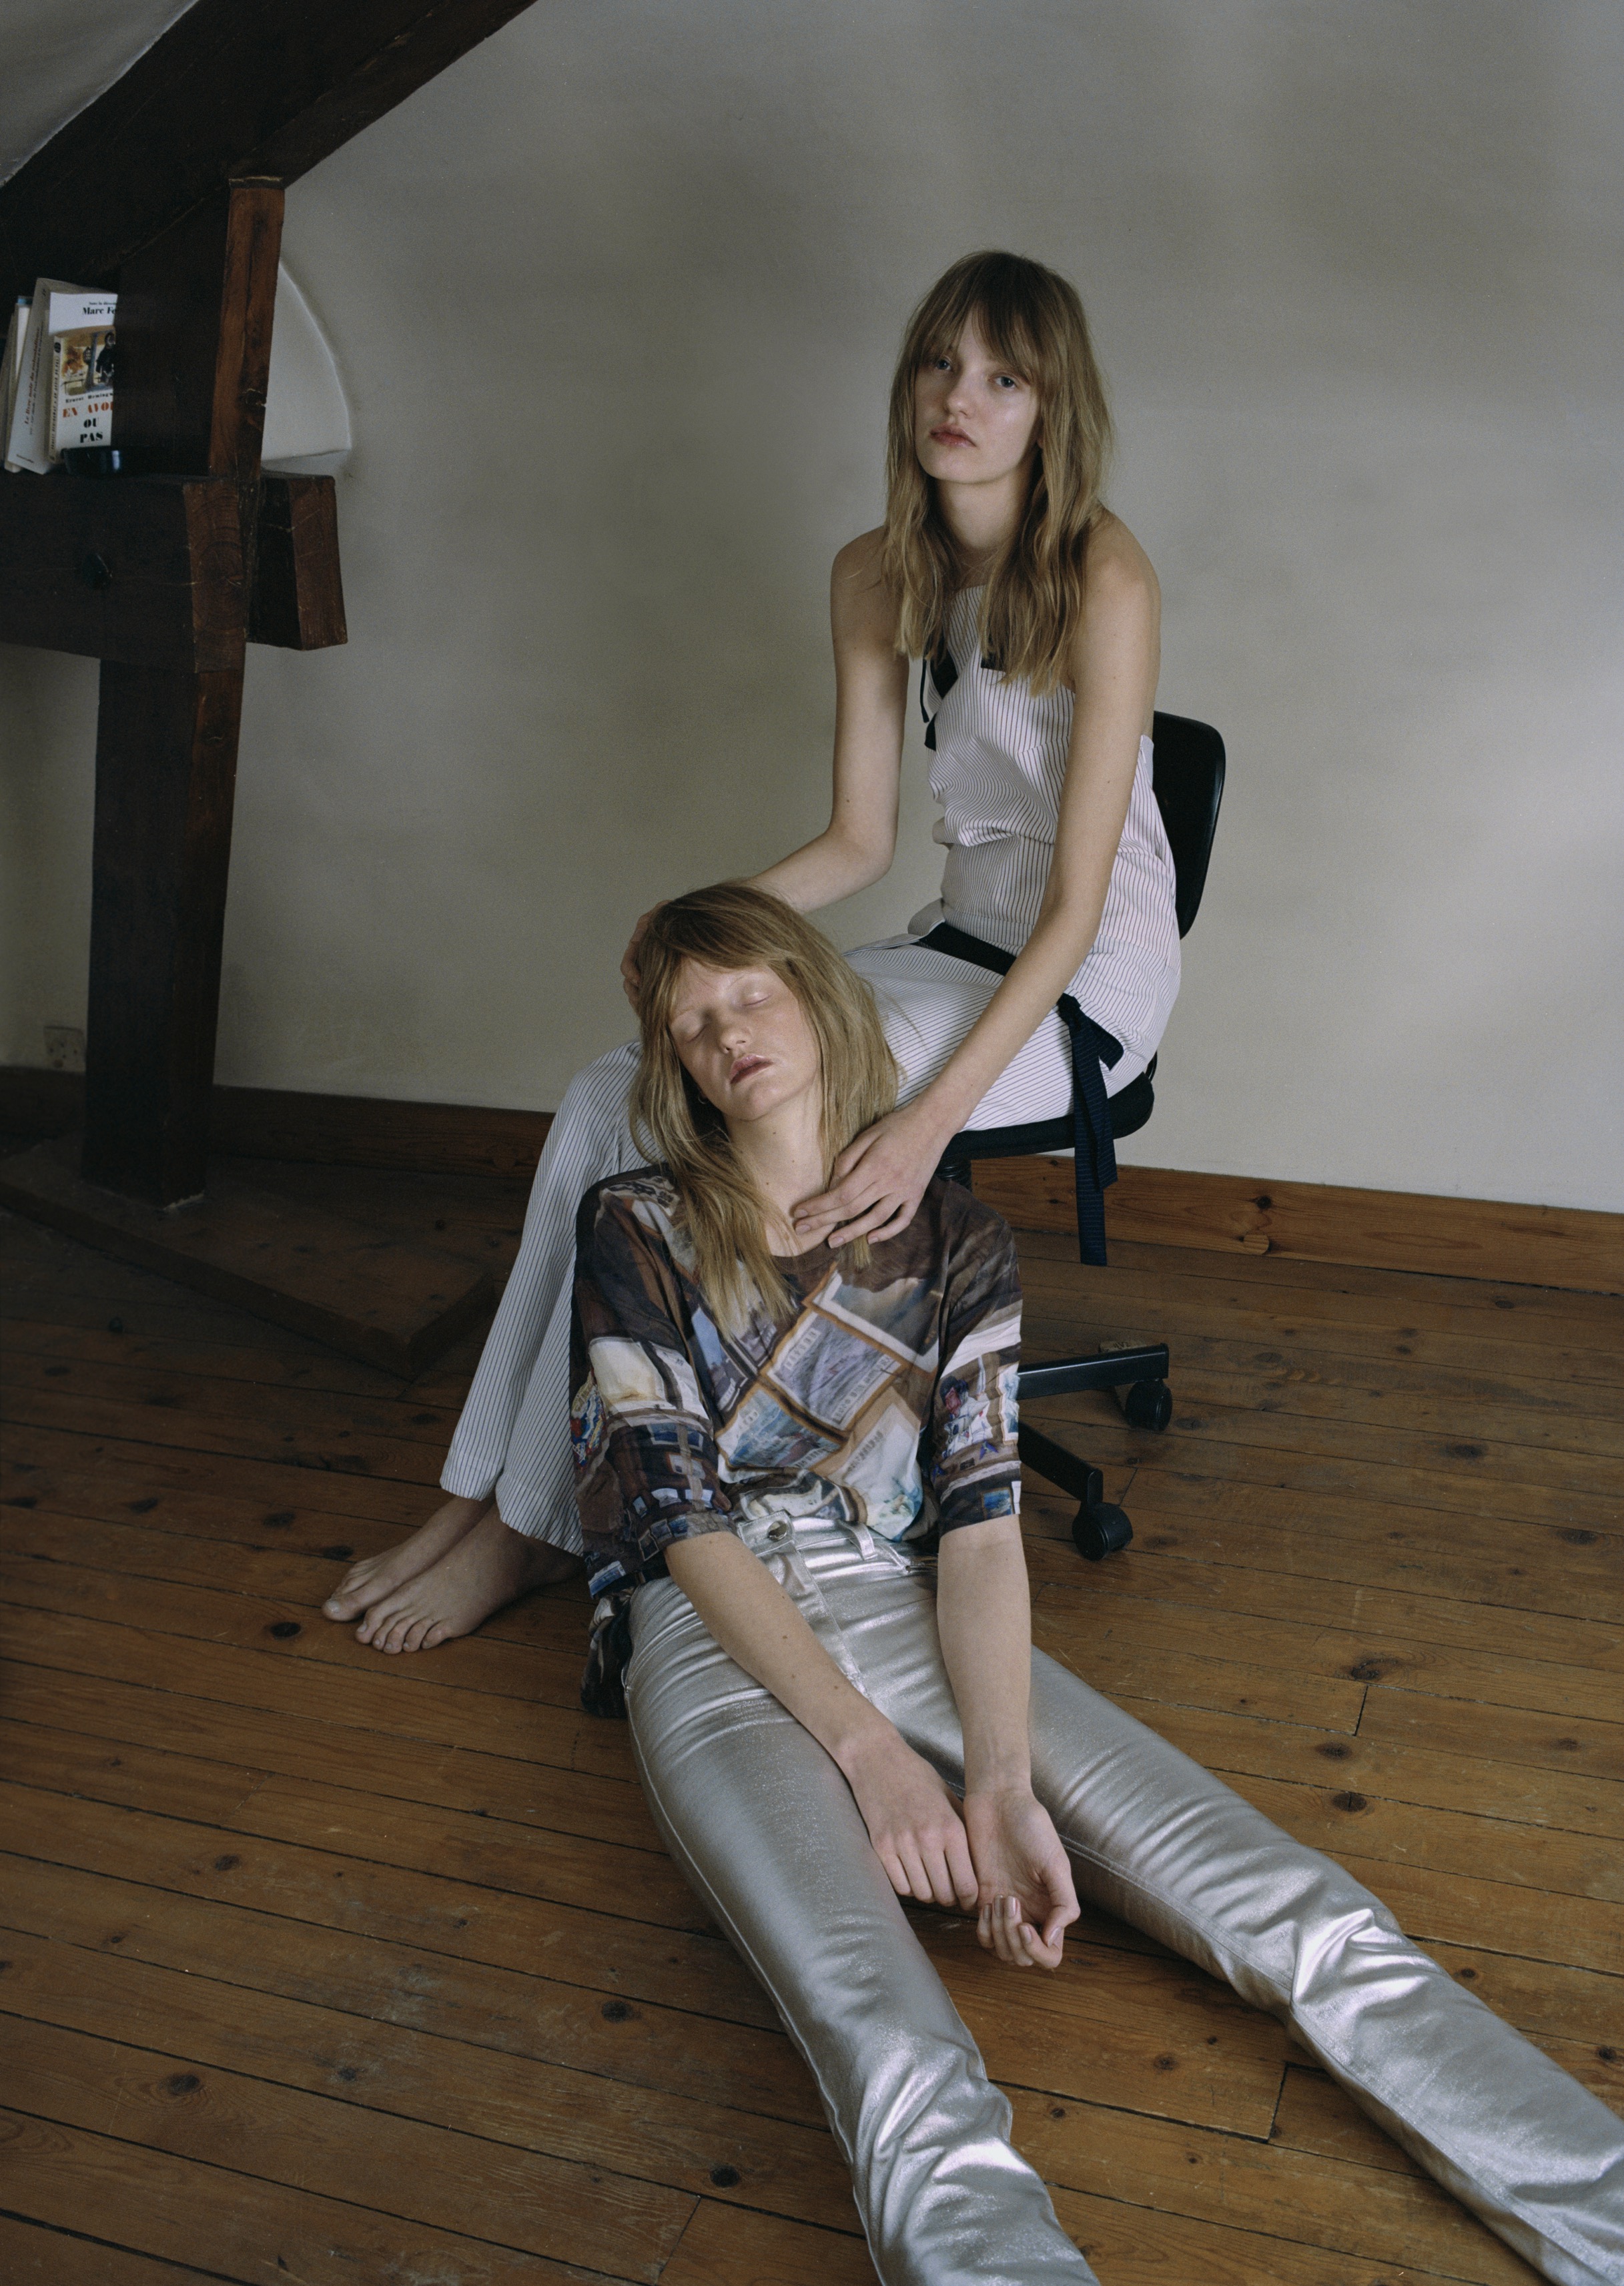  Striped blouse and trousers  JACQUEMUS,  frame print tee  BLESS,  silver denim trousers  PACO RABANNE.  